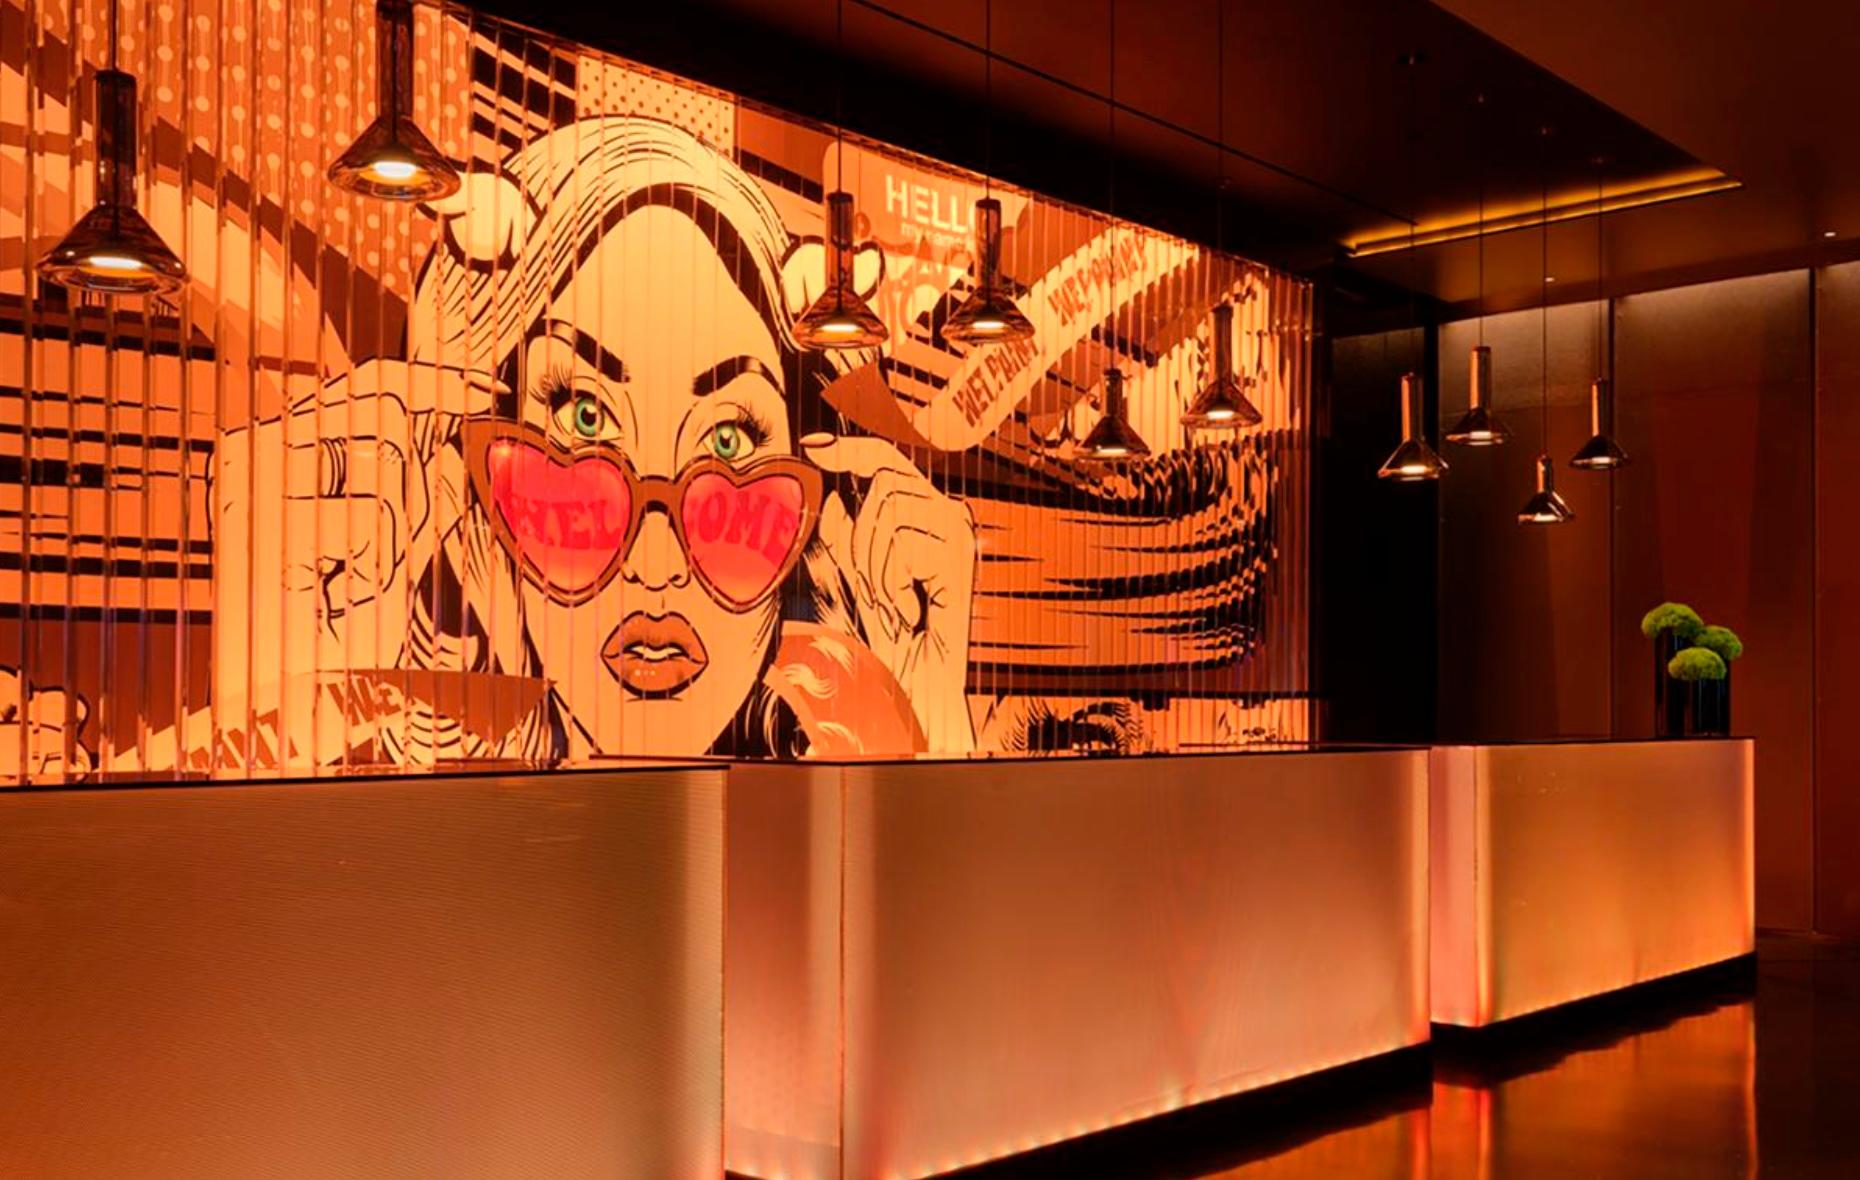 Cool creative art’otel London Hoxton is now open 